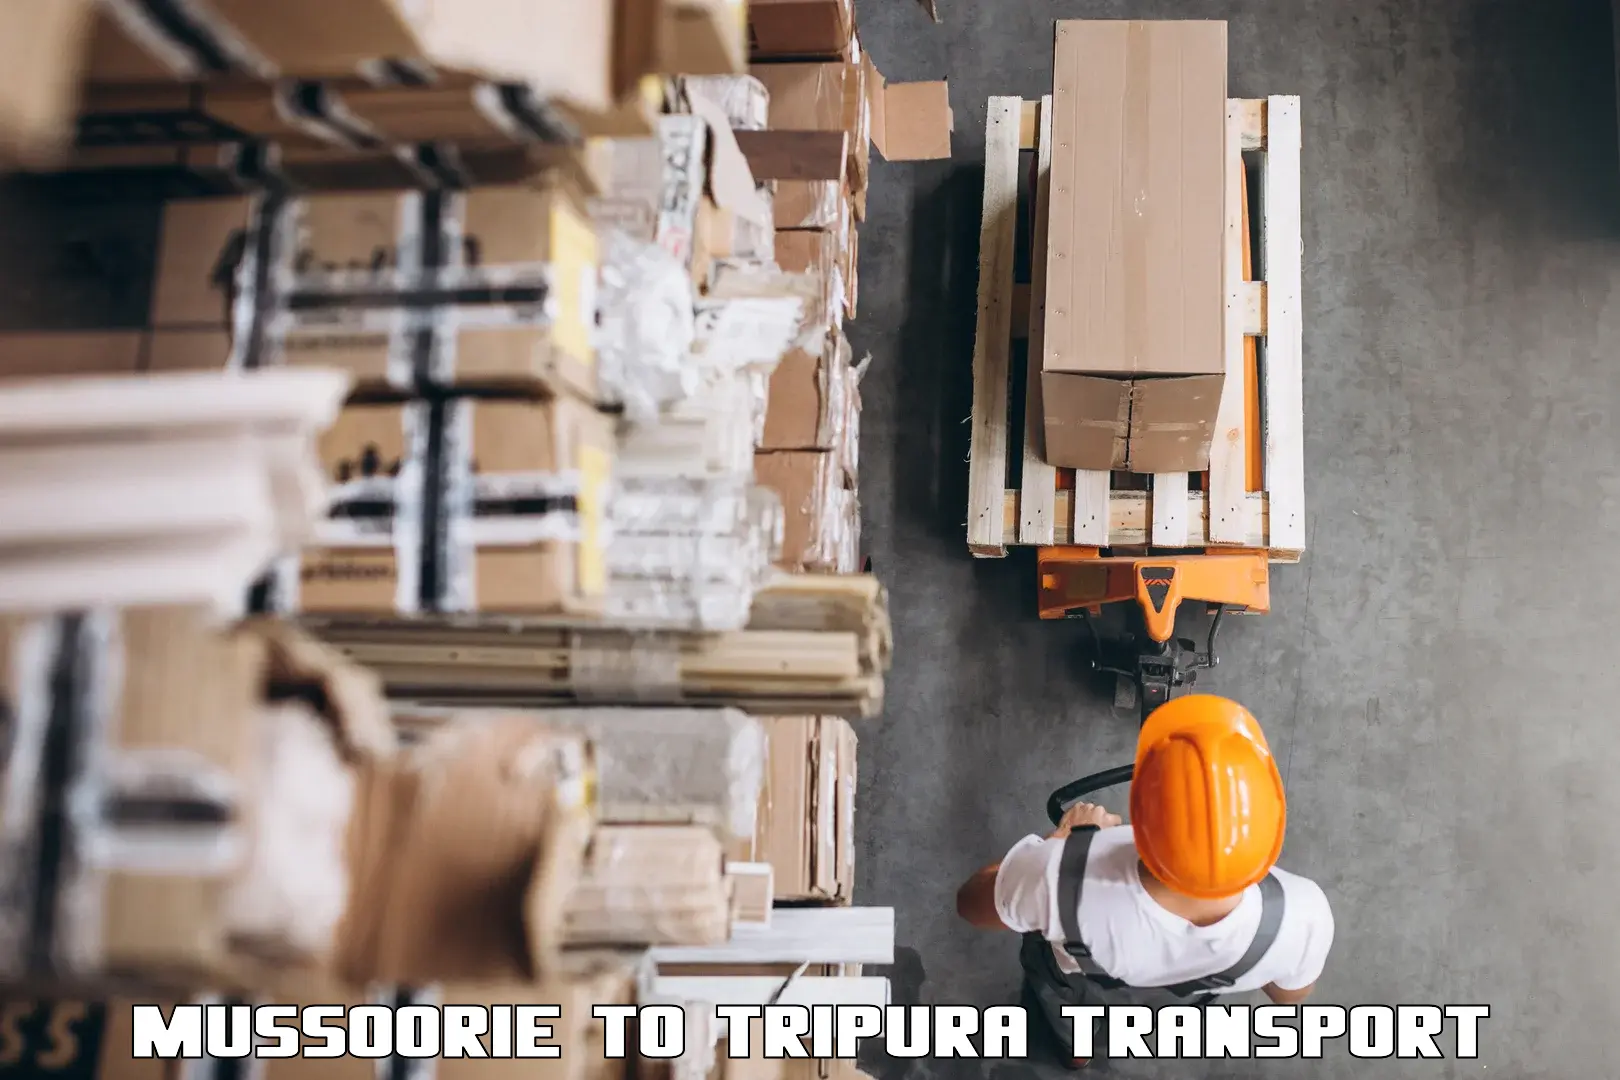 Furniture transport service Mussoorie to Kumarghat